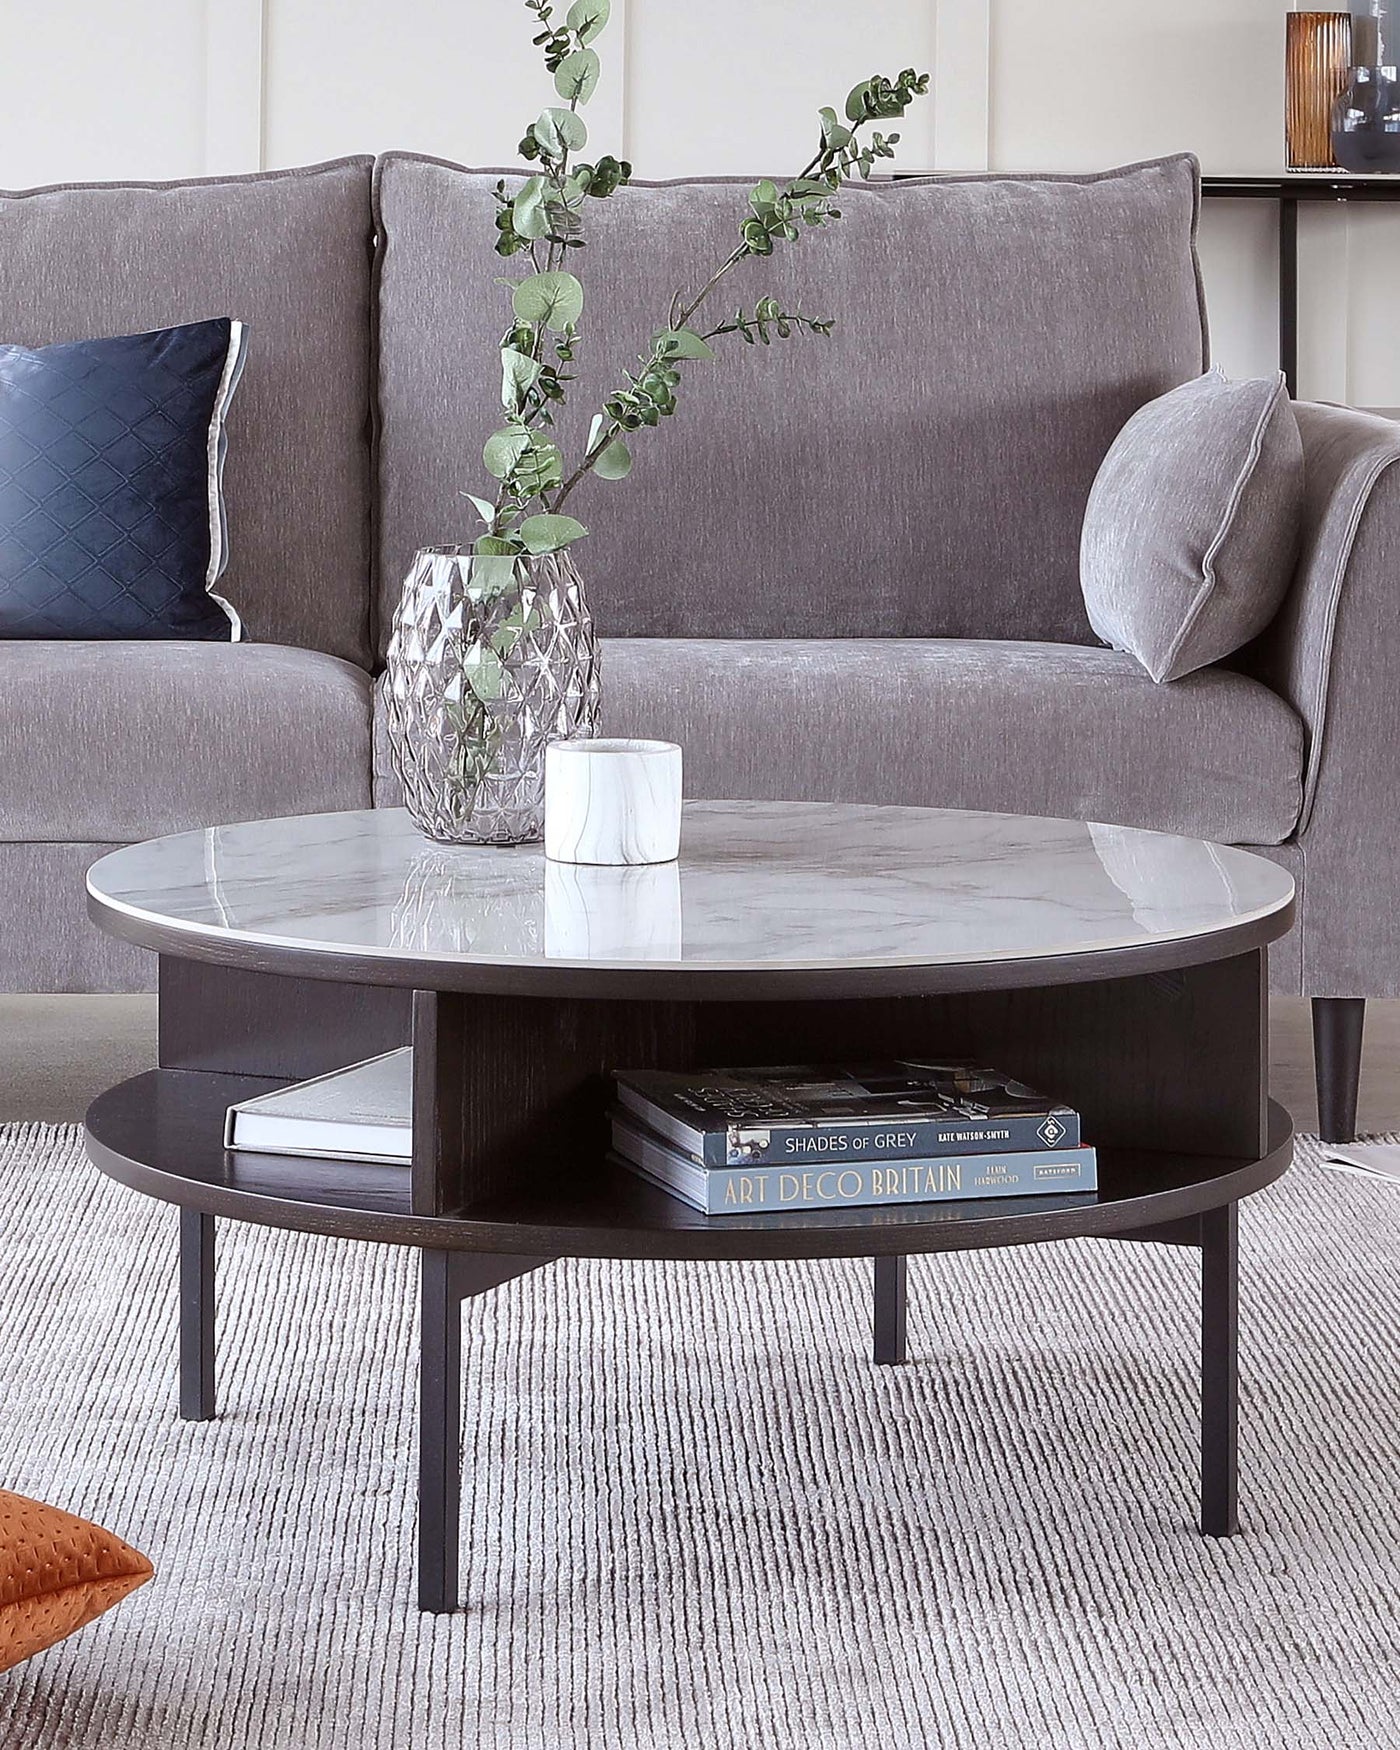 A modern living room showcasing a sleek, round, dark wooden coffee table with a glossy white marble tabletop. Below the tabletop is a circular shelf holding books, emphasizing the table's dual-function design. Adjacent to the table is a section of a grey fabric sofa with a plush cushion and a decorative pillow. The setting is completed with a textured light grey area rug, providing a soft foundation for the elegant furniture pieces.